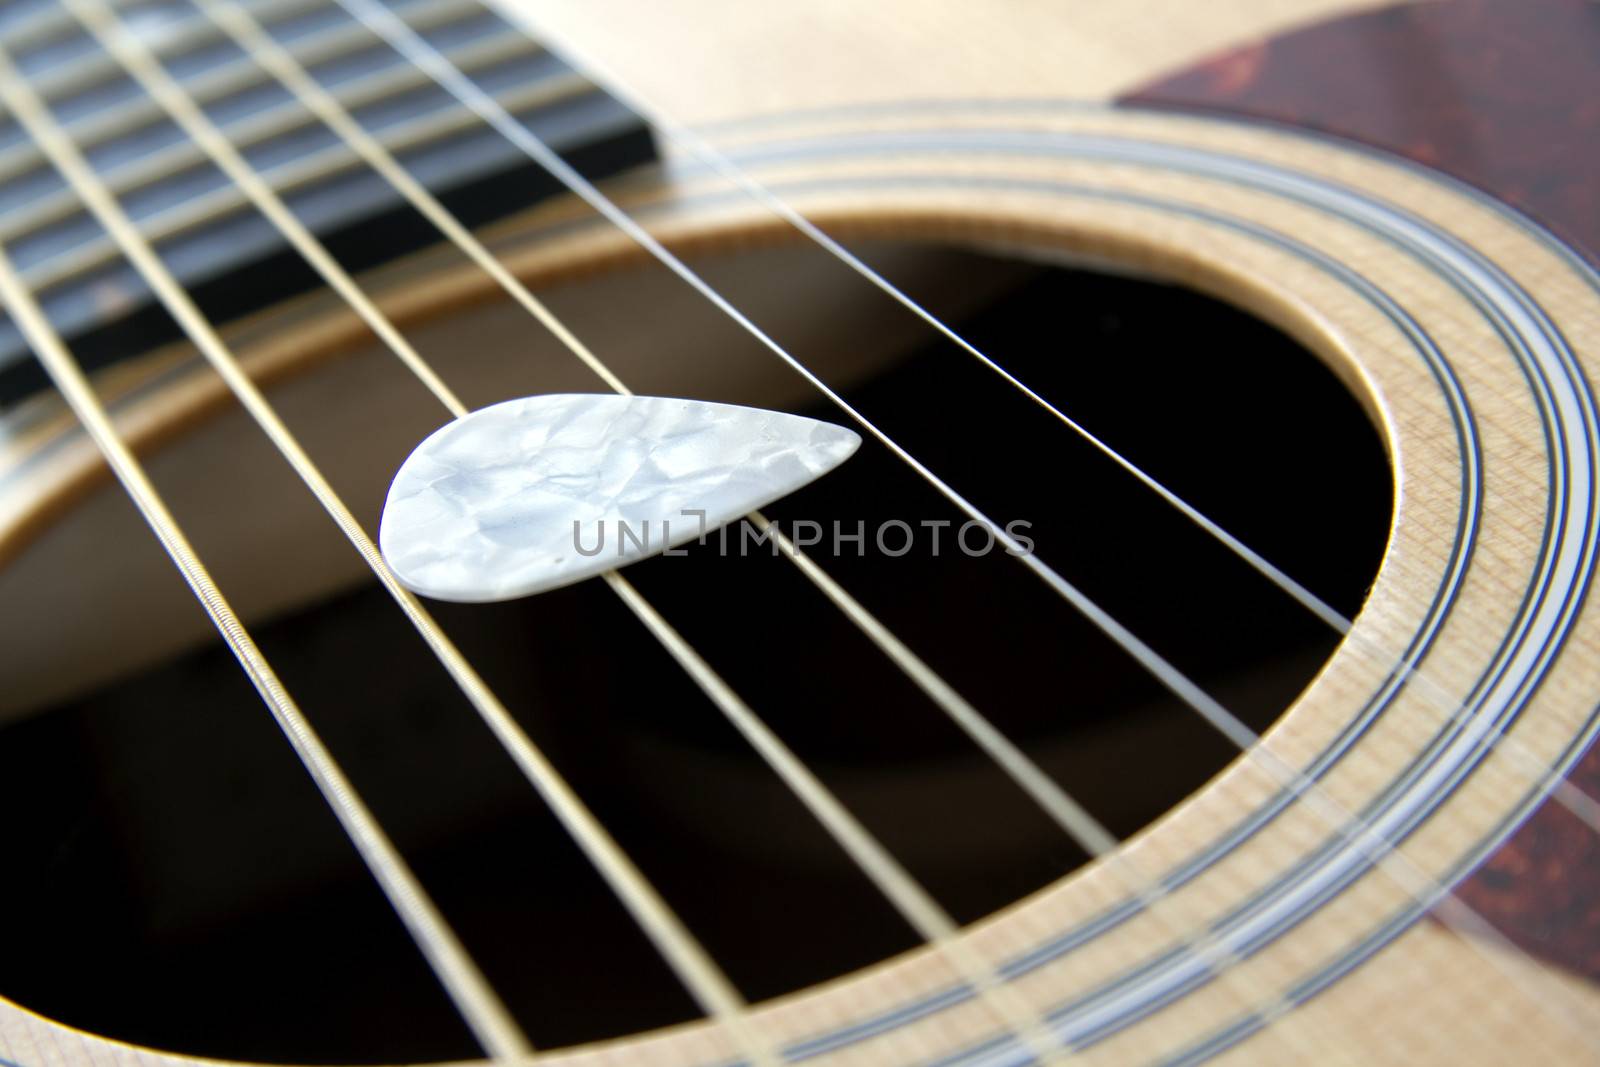 Plectrum on strings by ChrisAlleaume